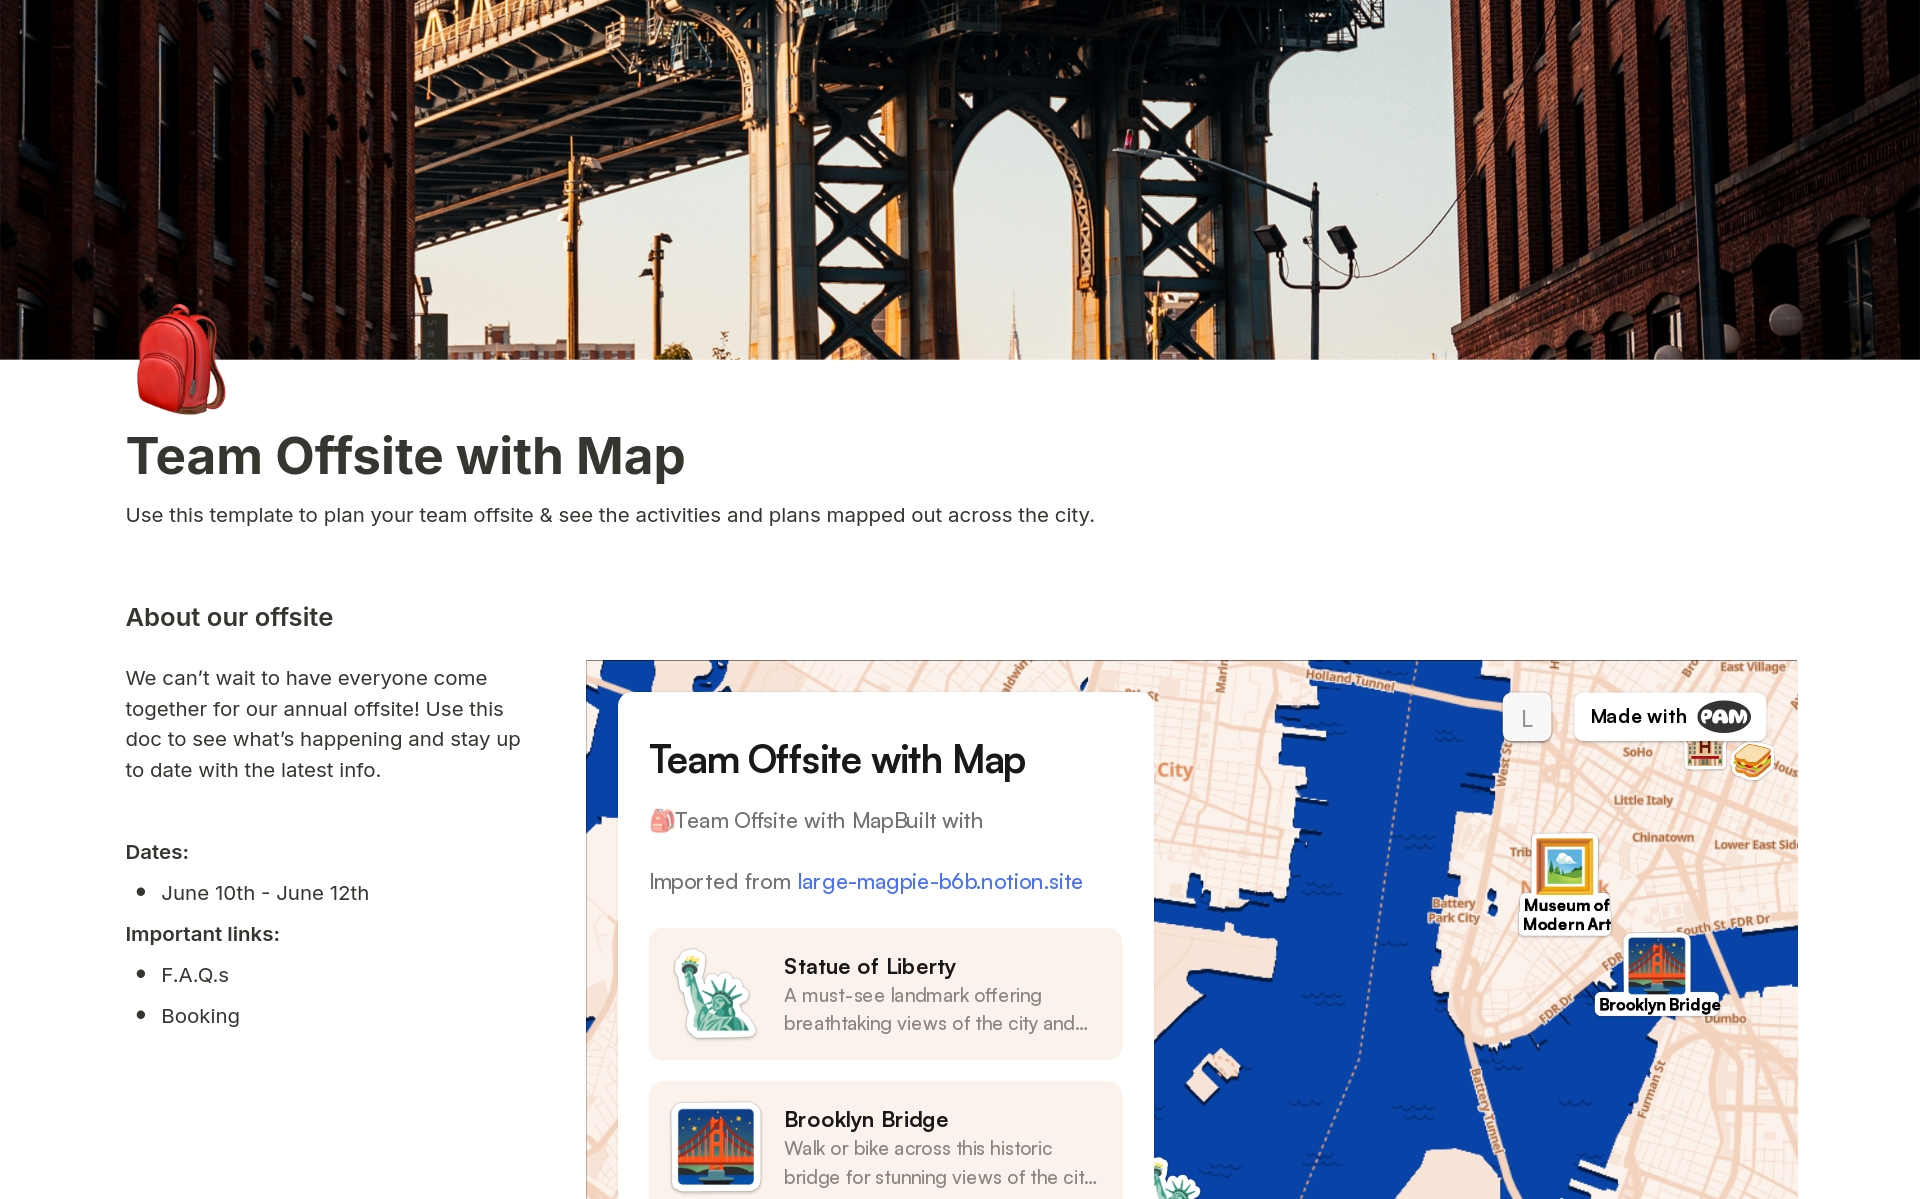 Plan your team offsite with Notion, and include an instantly generated map with it - so that your team knows where all the spots are.